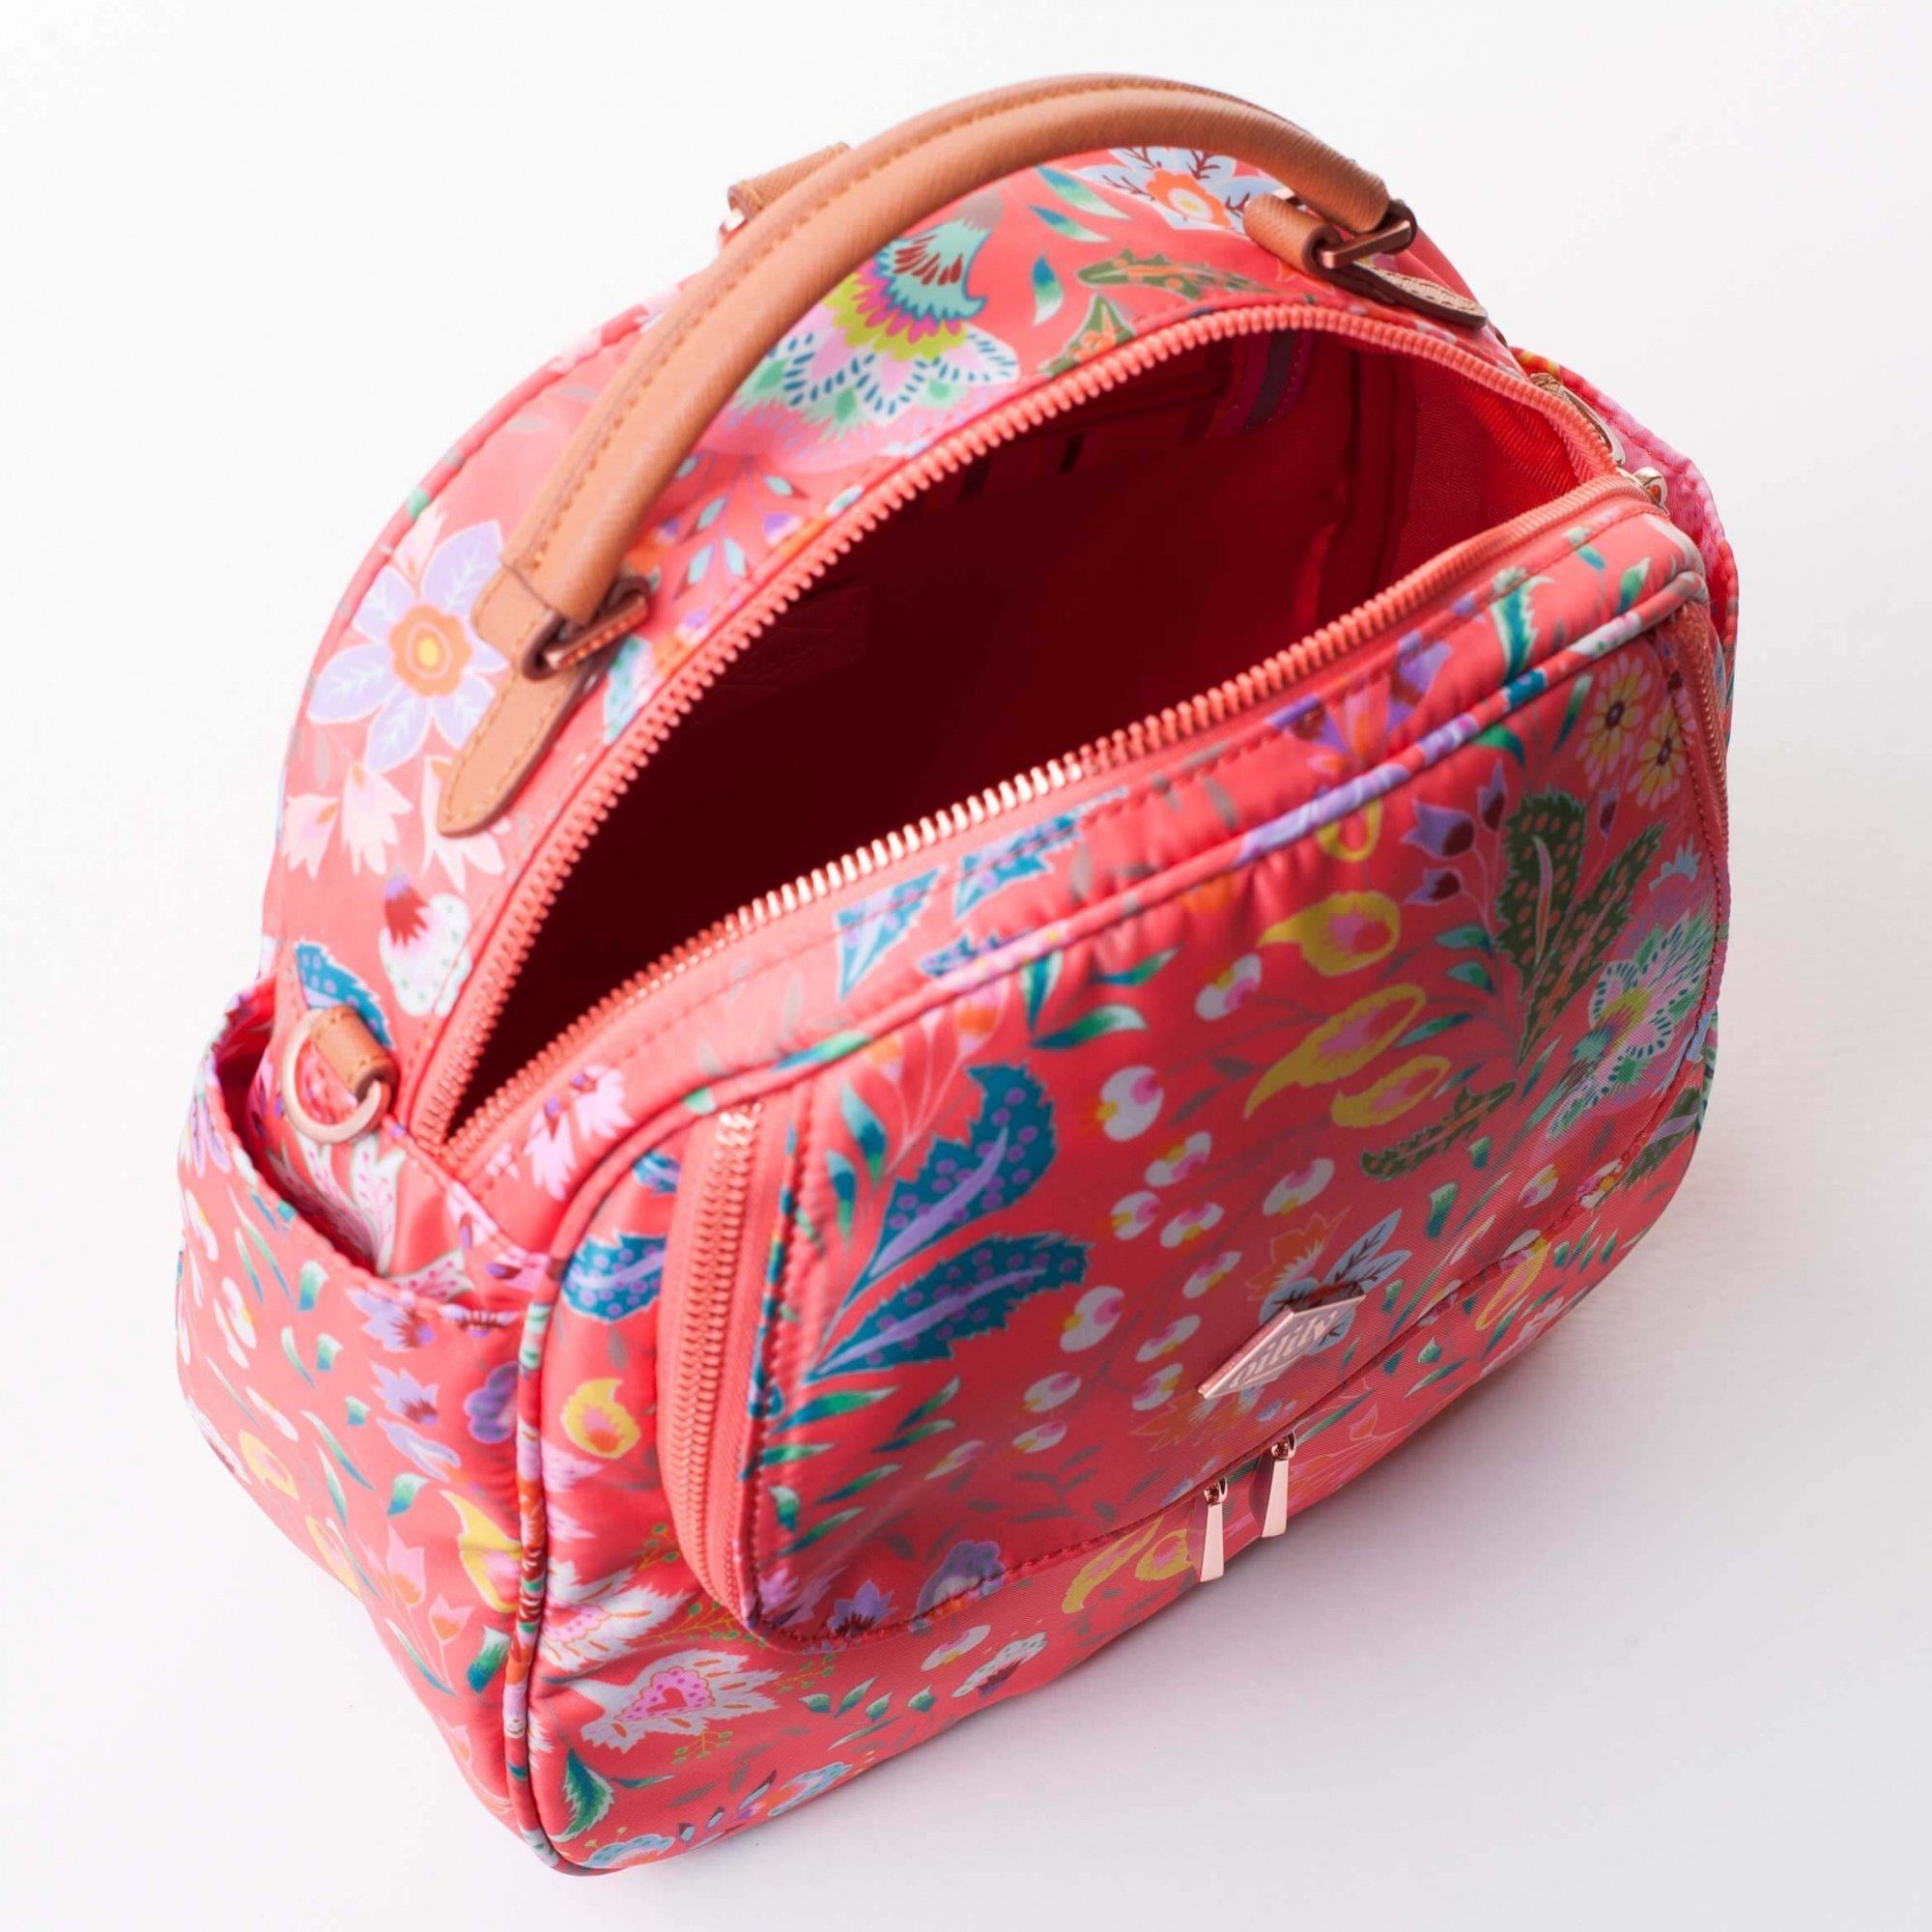 Coral Oilily Hot Schultertasche